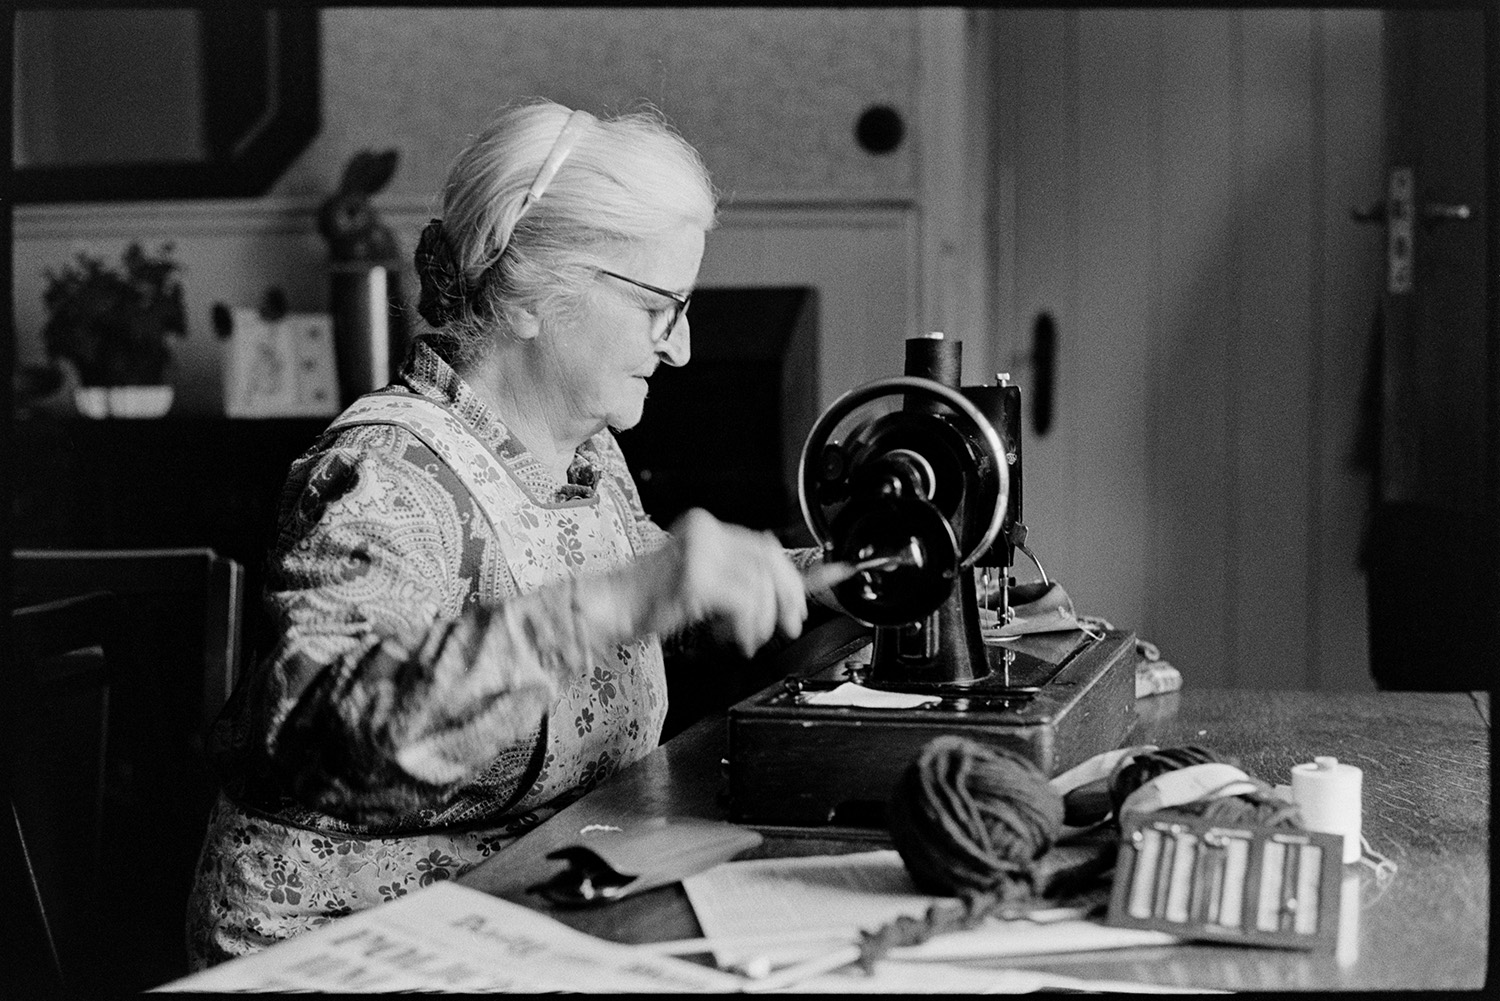 Woman using sewing machine. 
[Norah Maynard using a manual sewing machine in her home at Atherington. A glasses case and ball of wool or thread is on the table.]